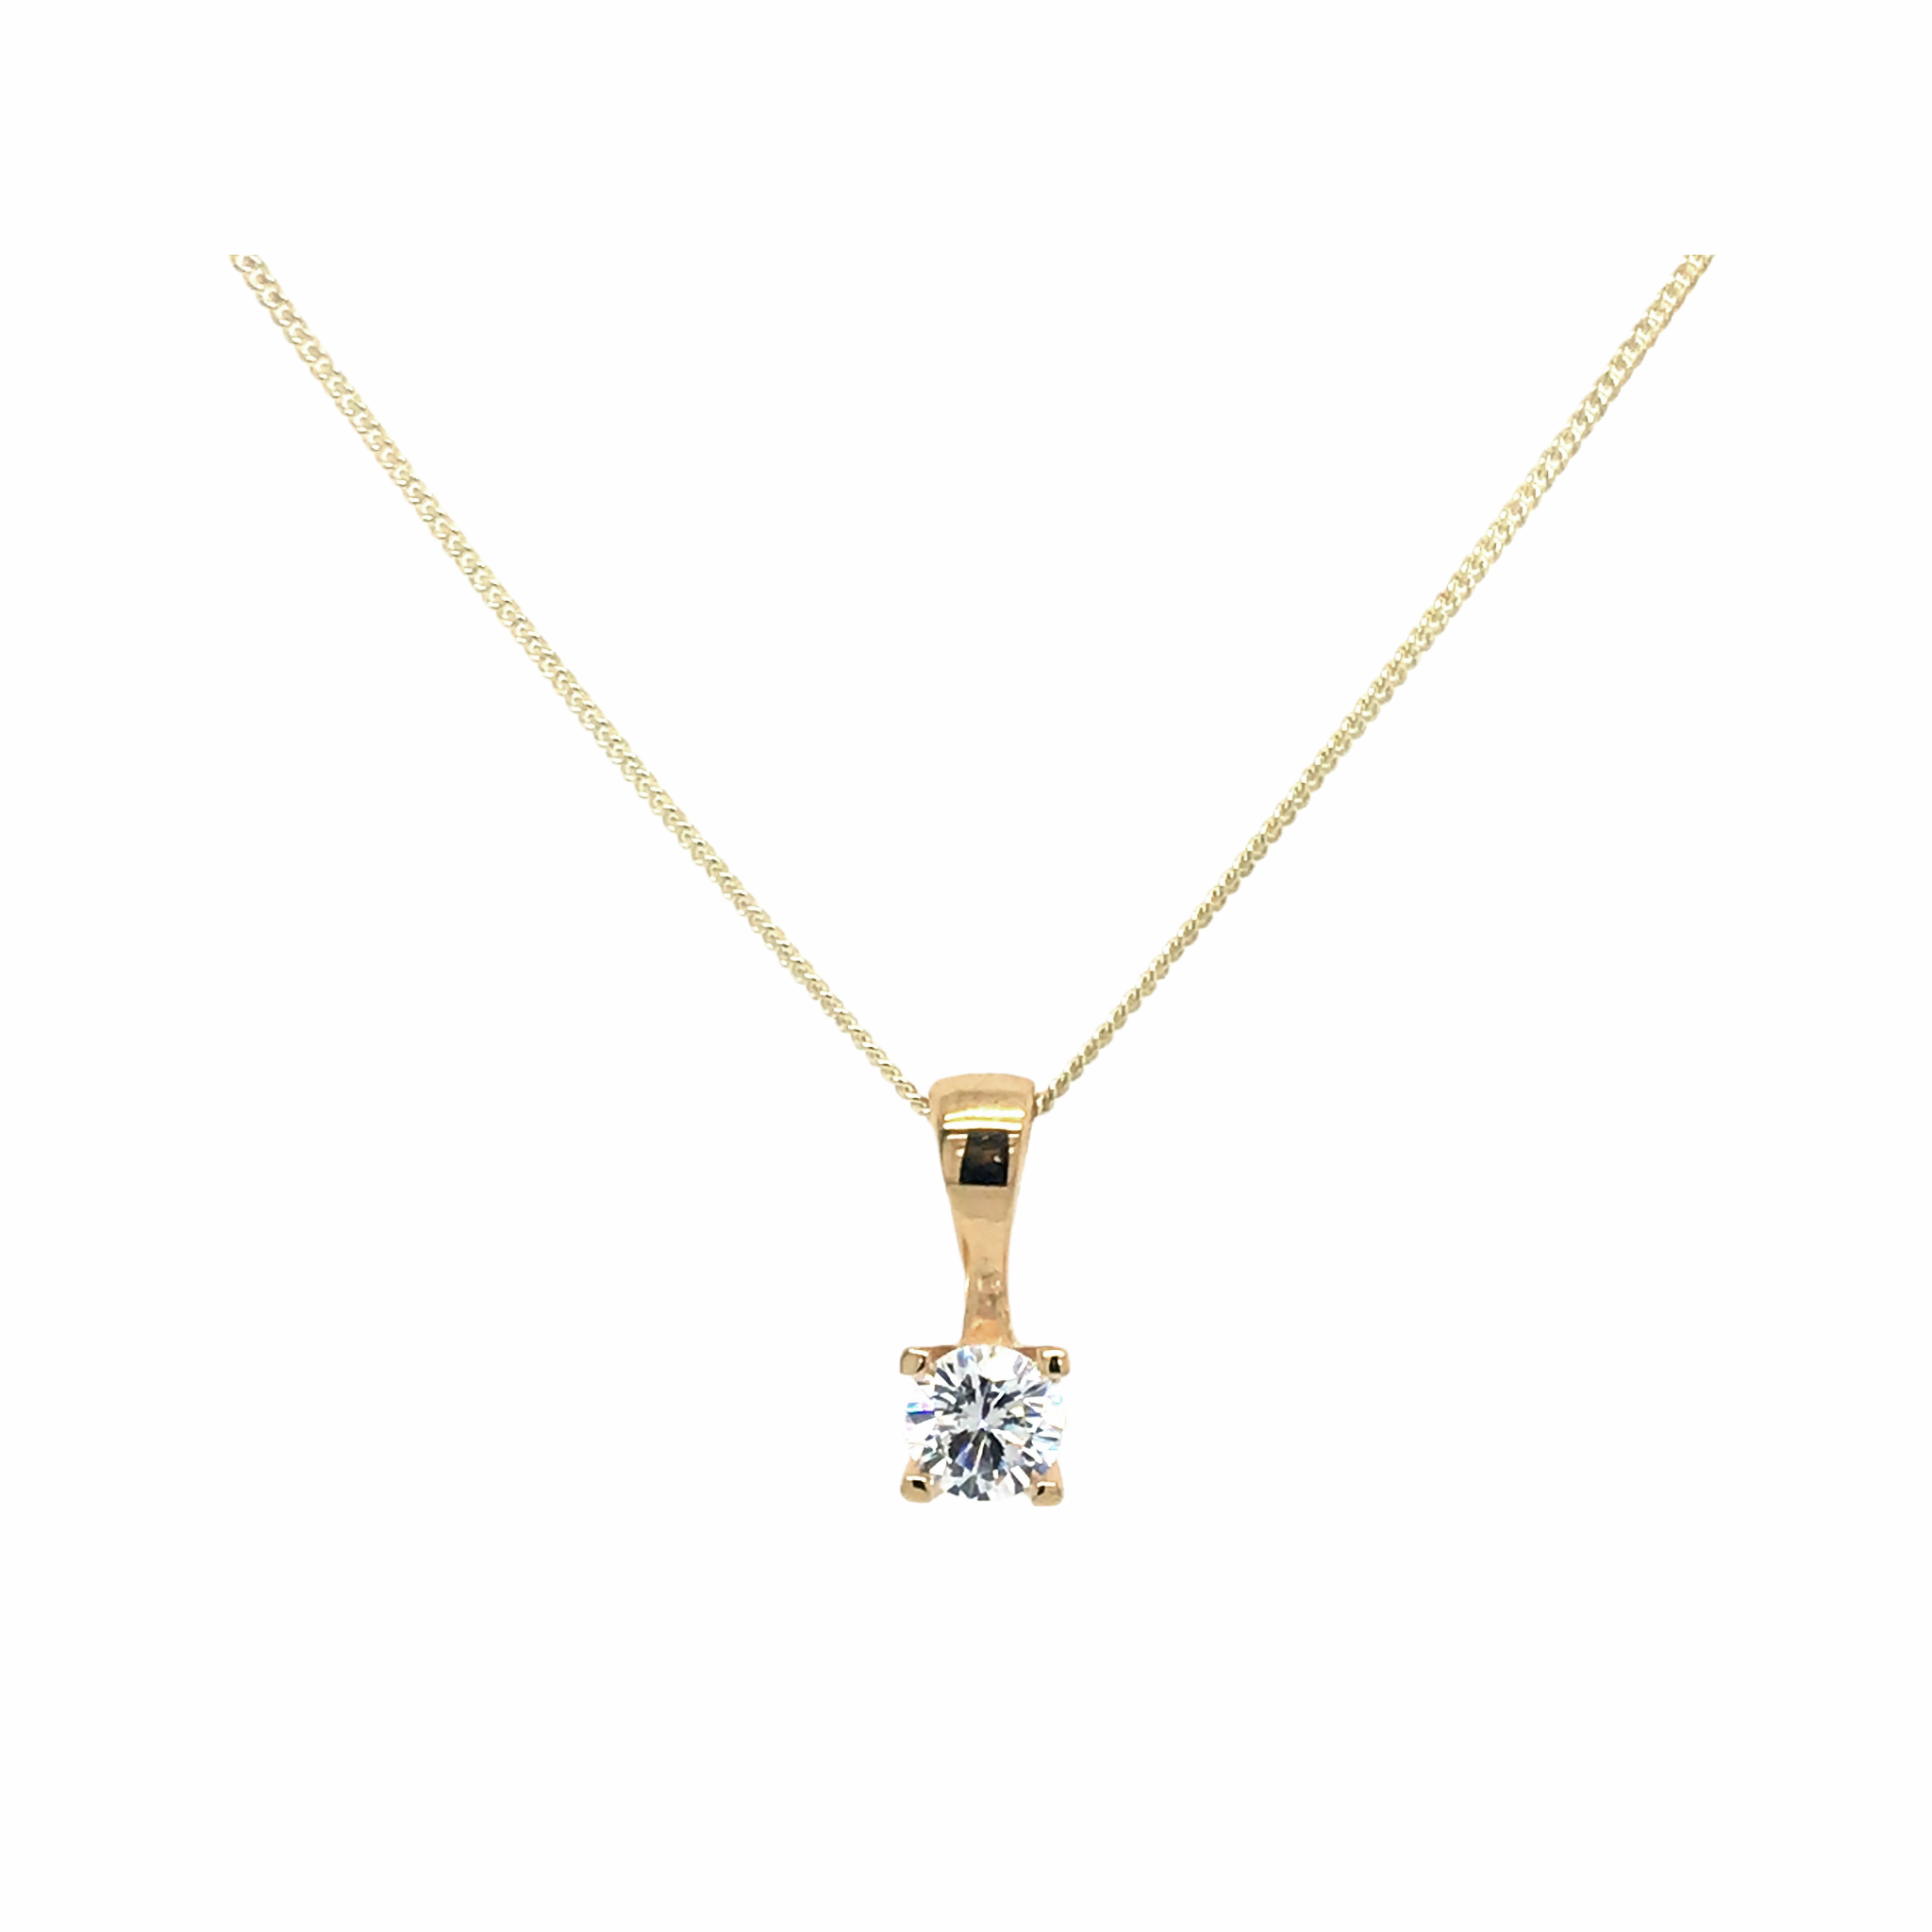 Silver Yellow Gold Plated CZ Pendant on Chain